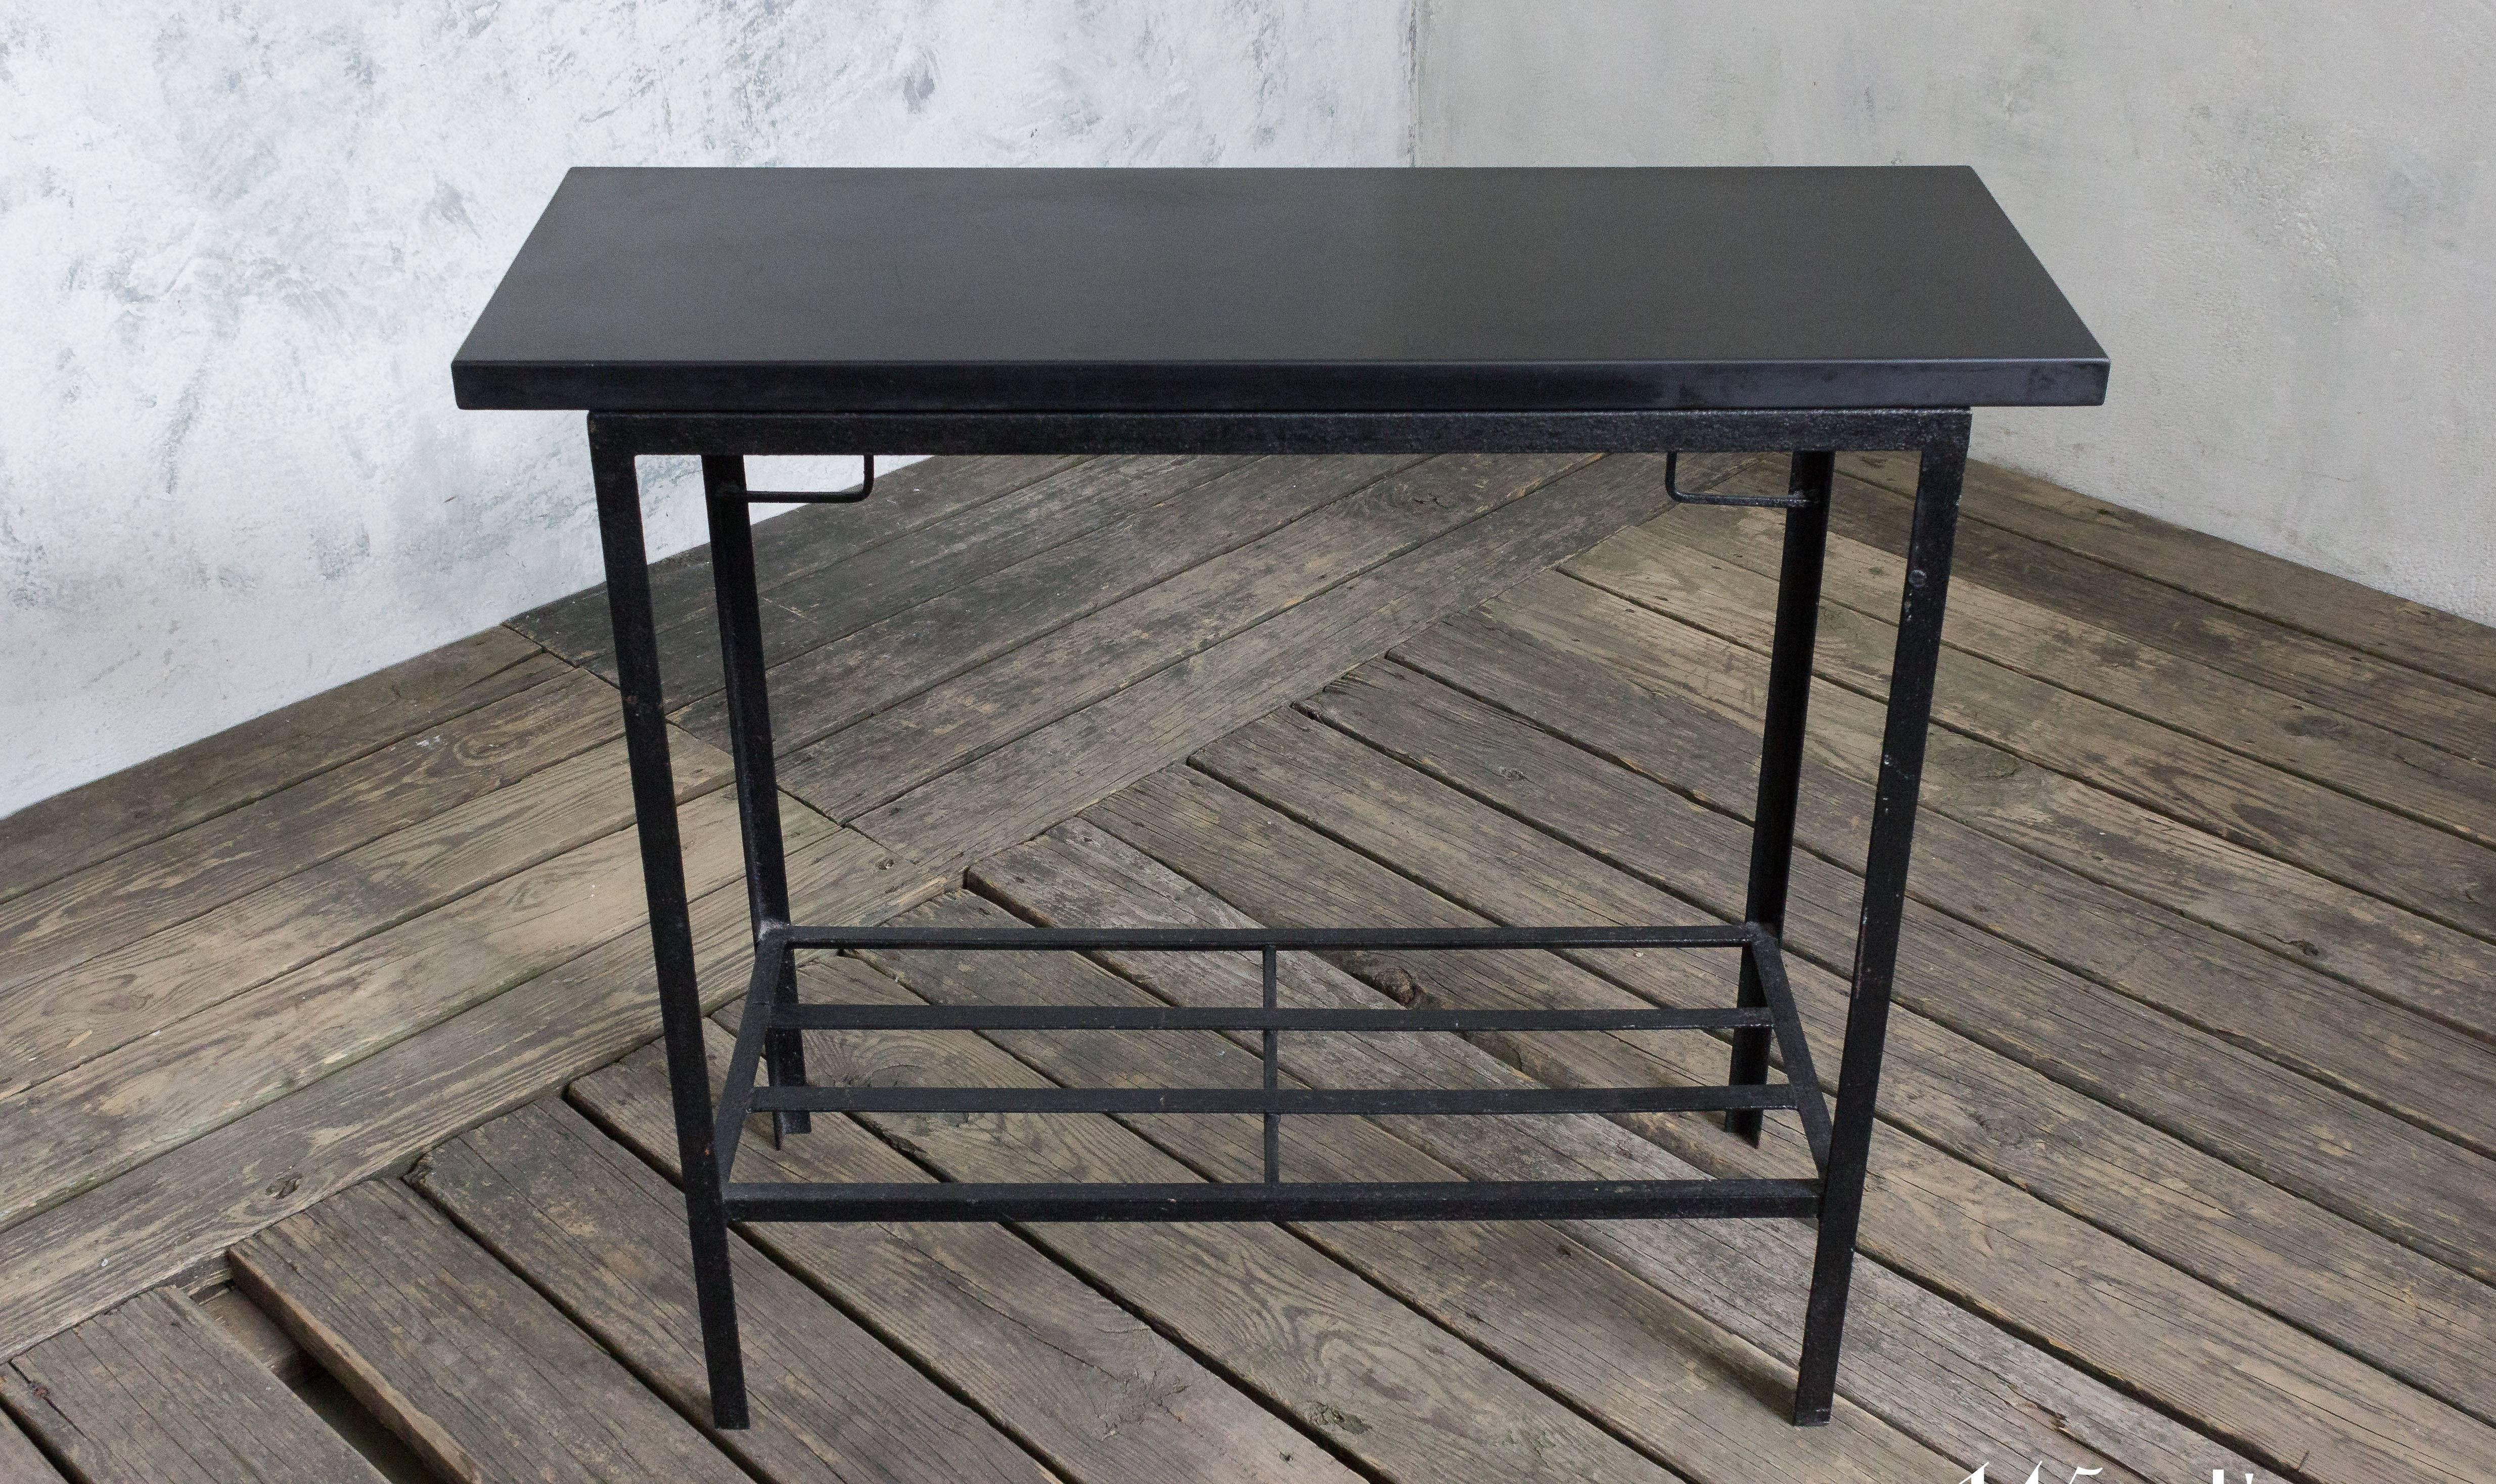 Painted Black Iron Console with Black Stone Top, Mid-Century Modern 1